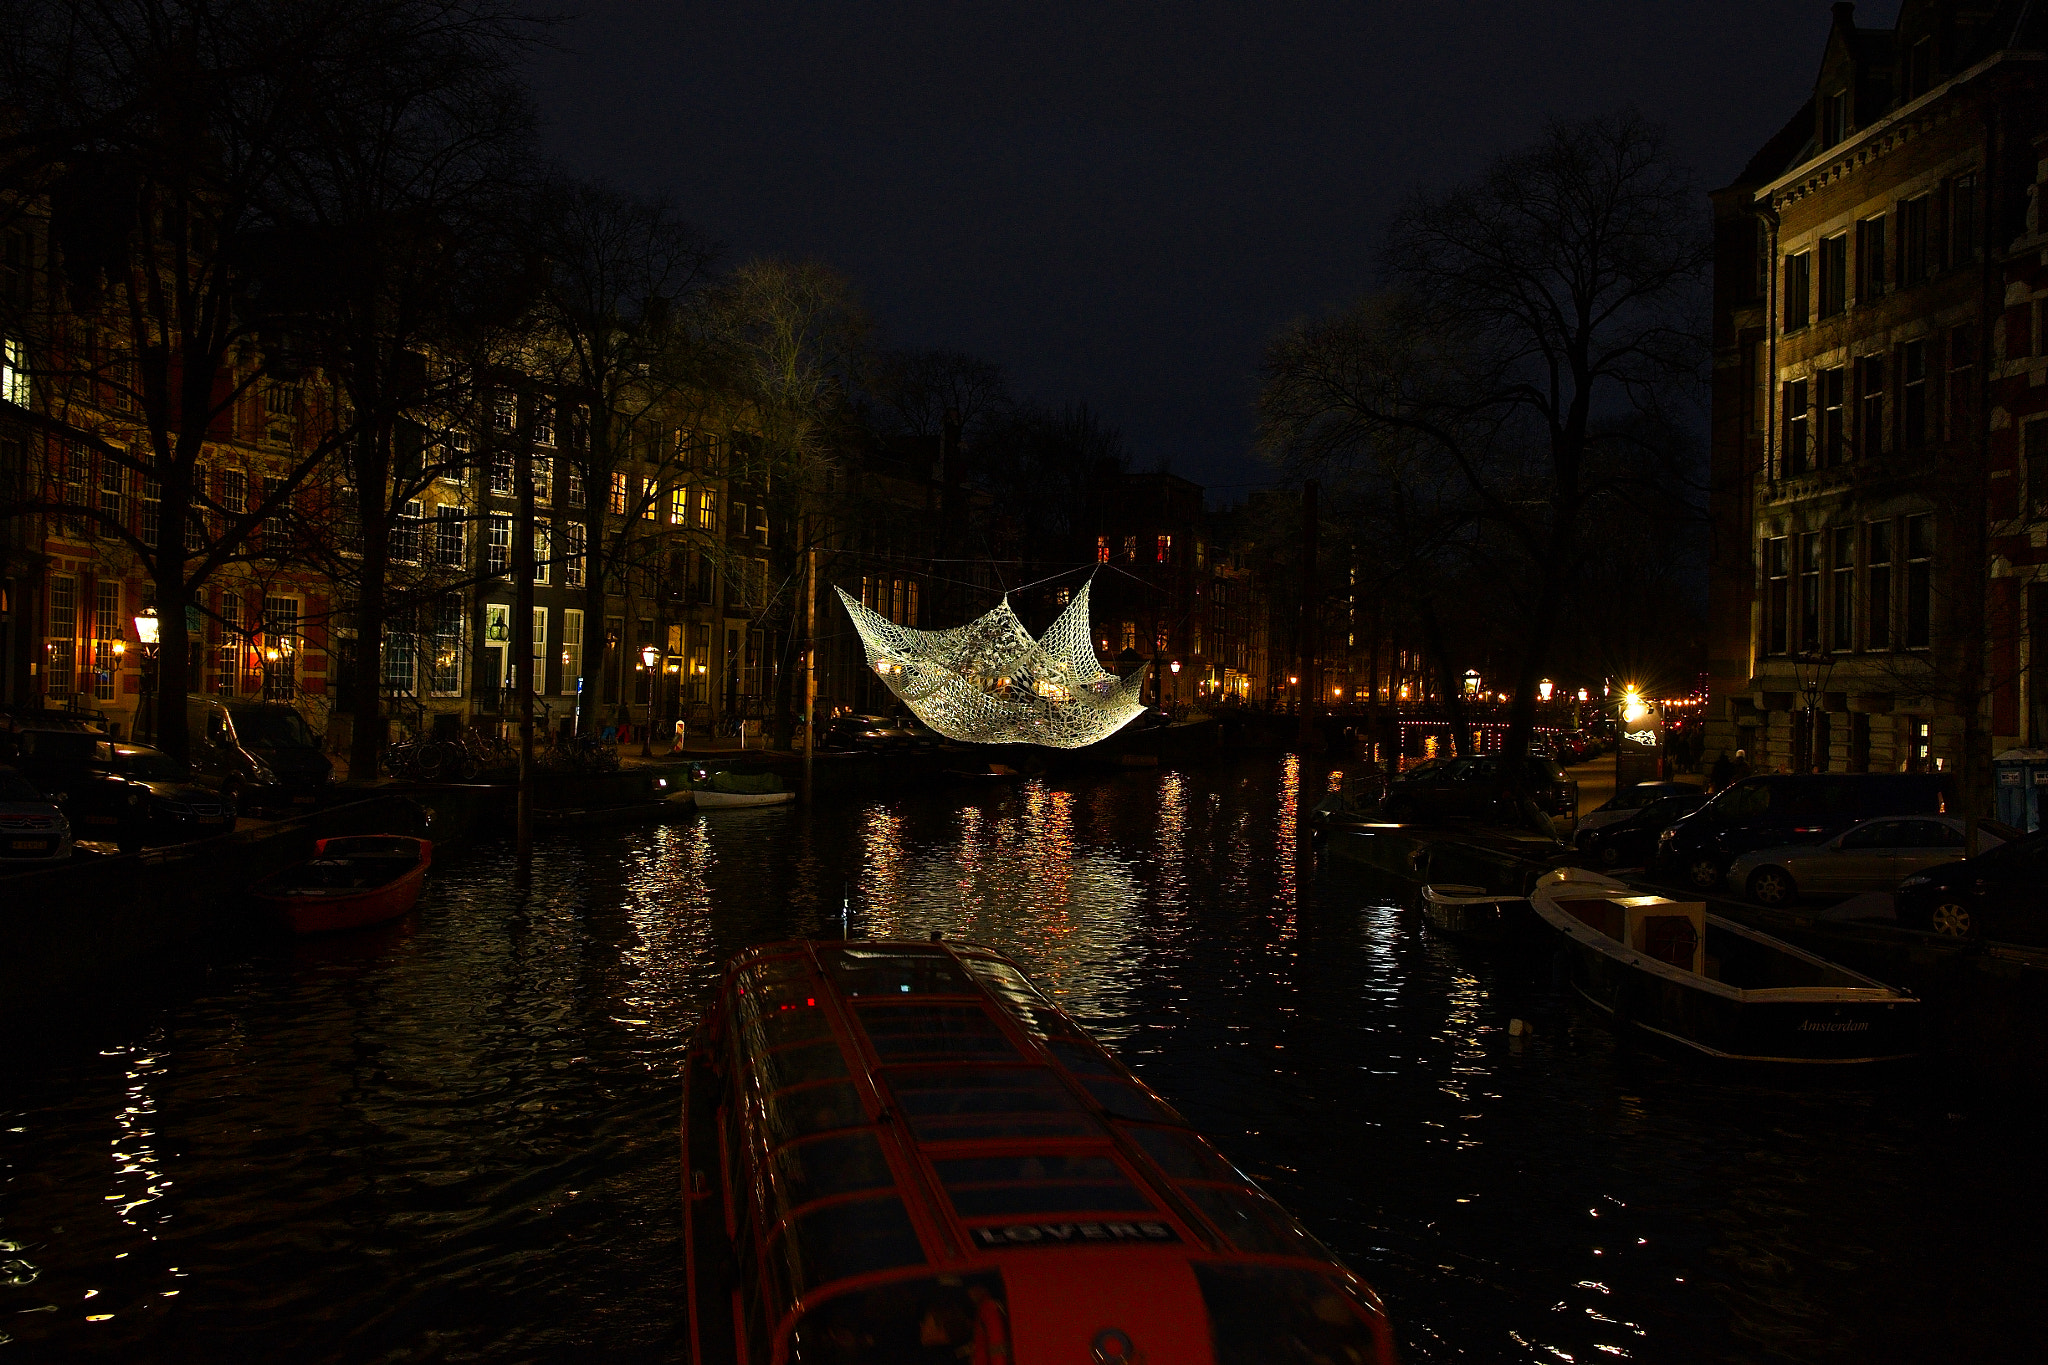 Fujifilm X-T10 sample photo. Light up the canal photography